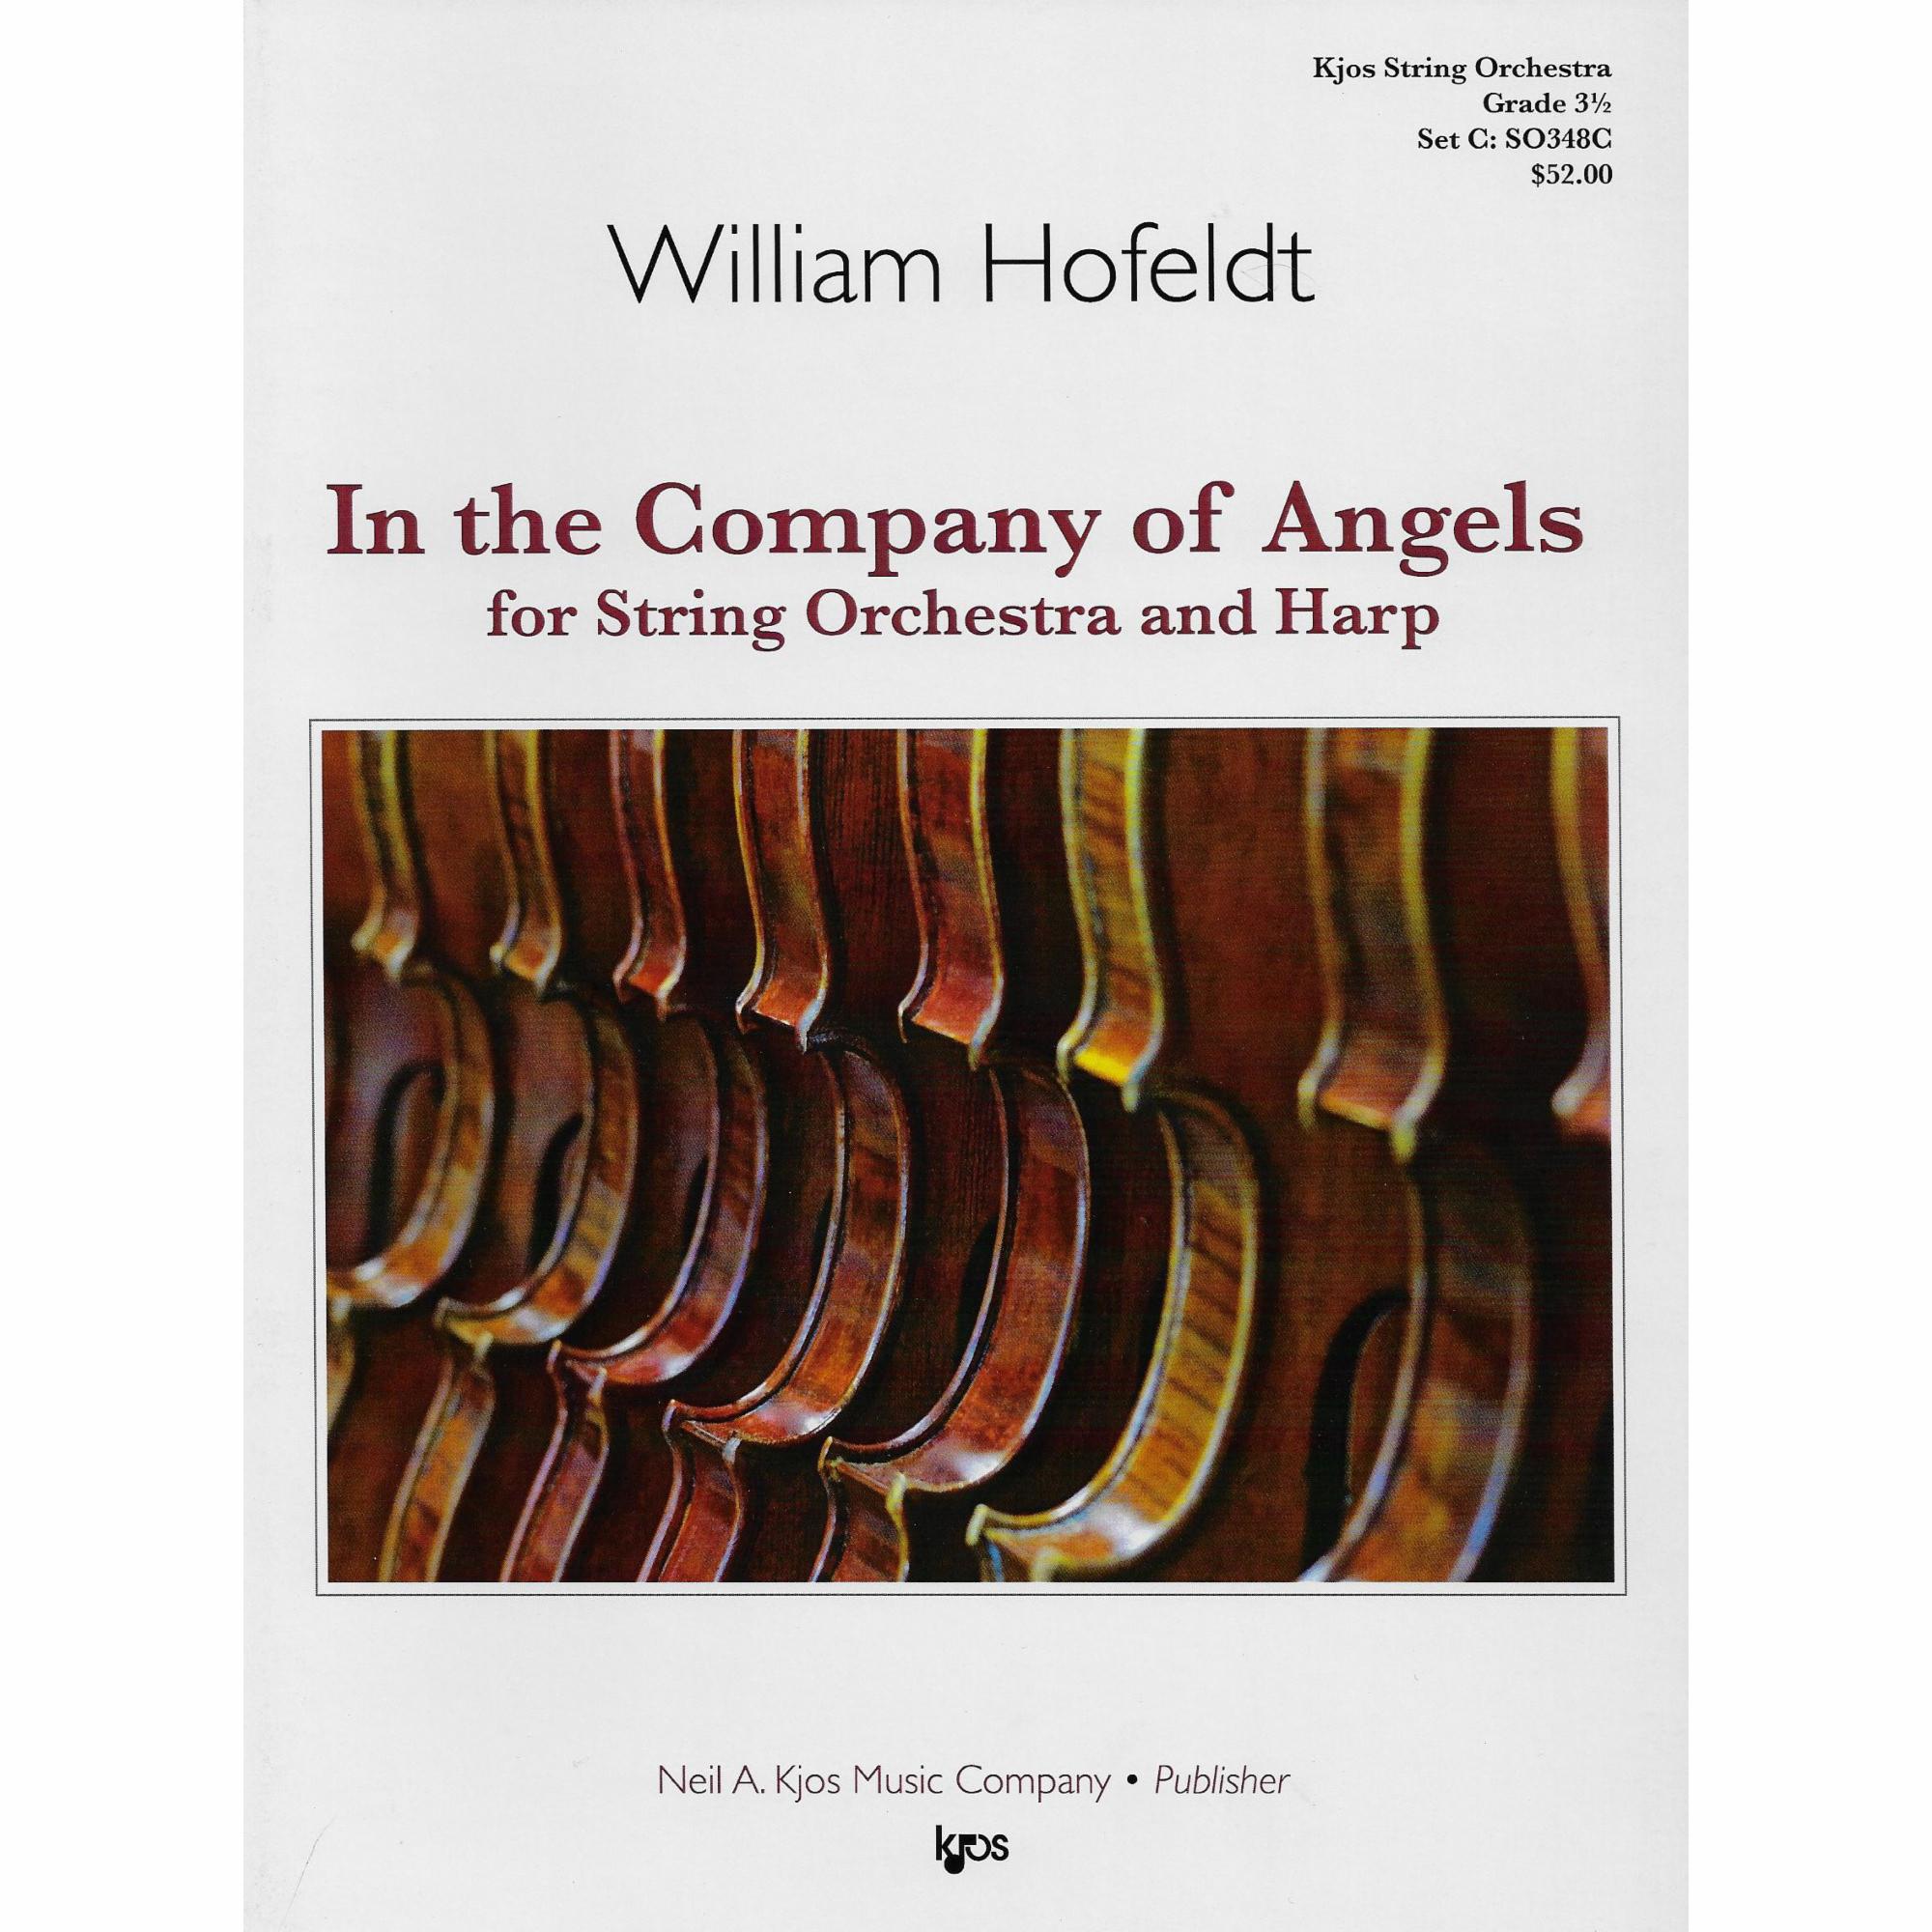 In the Company of Angels for String Orchestra